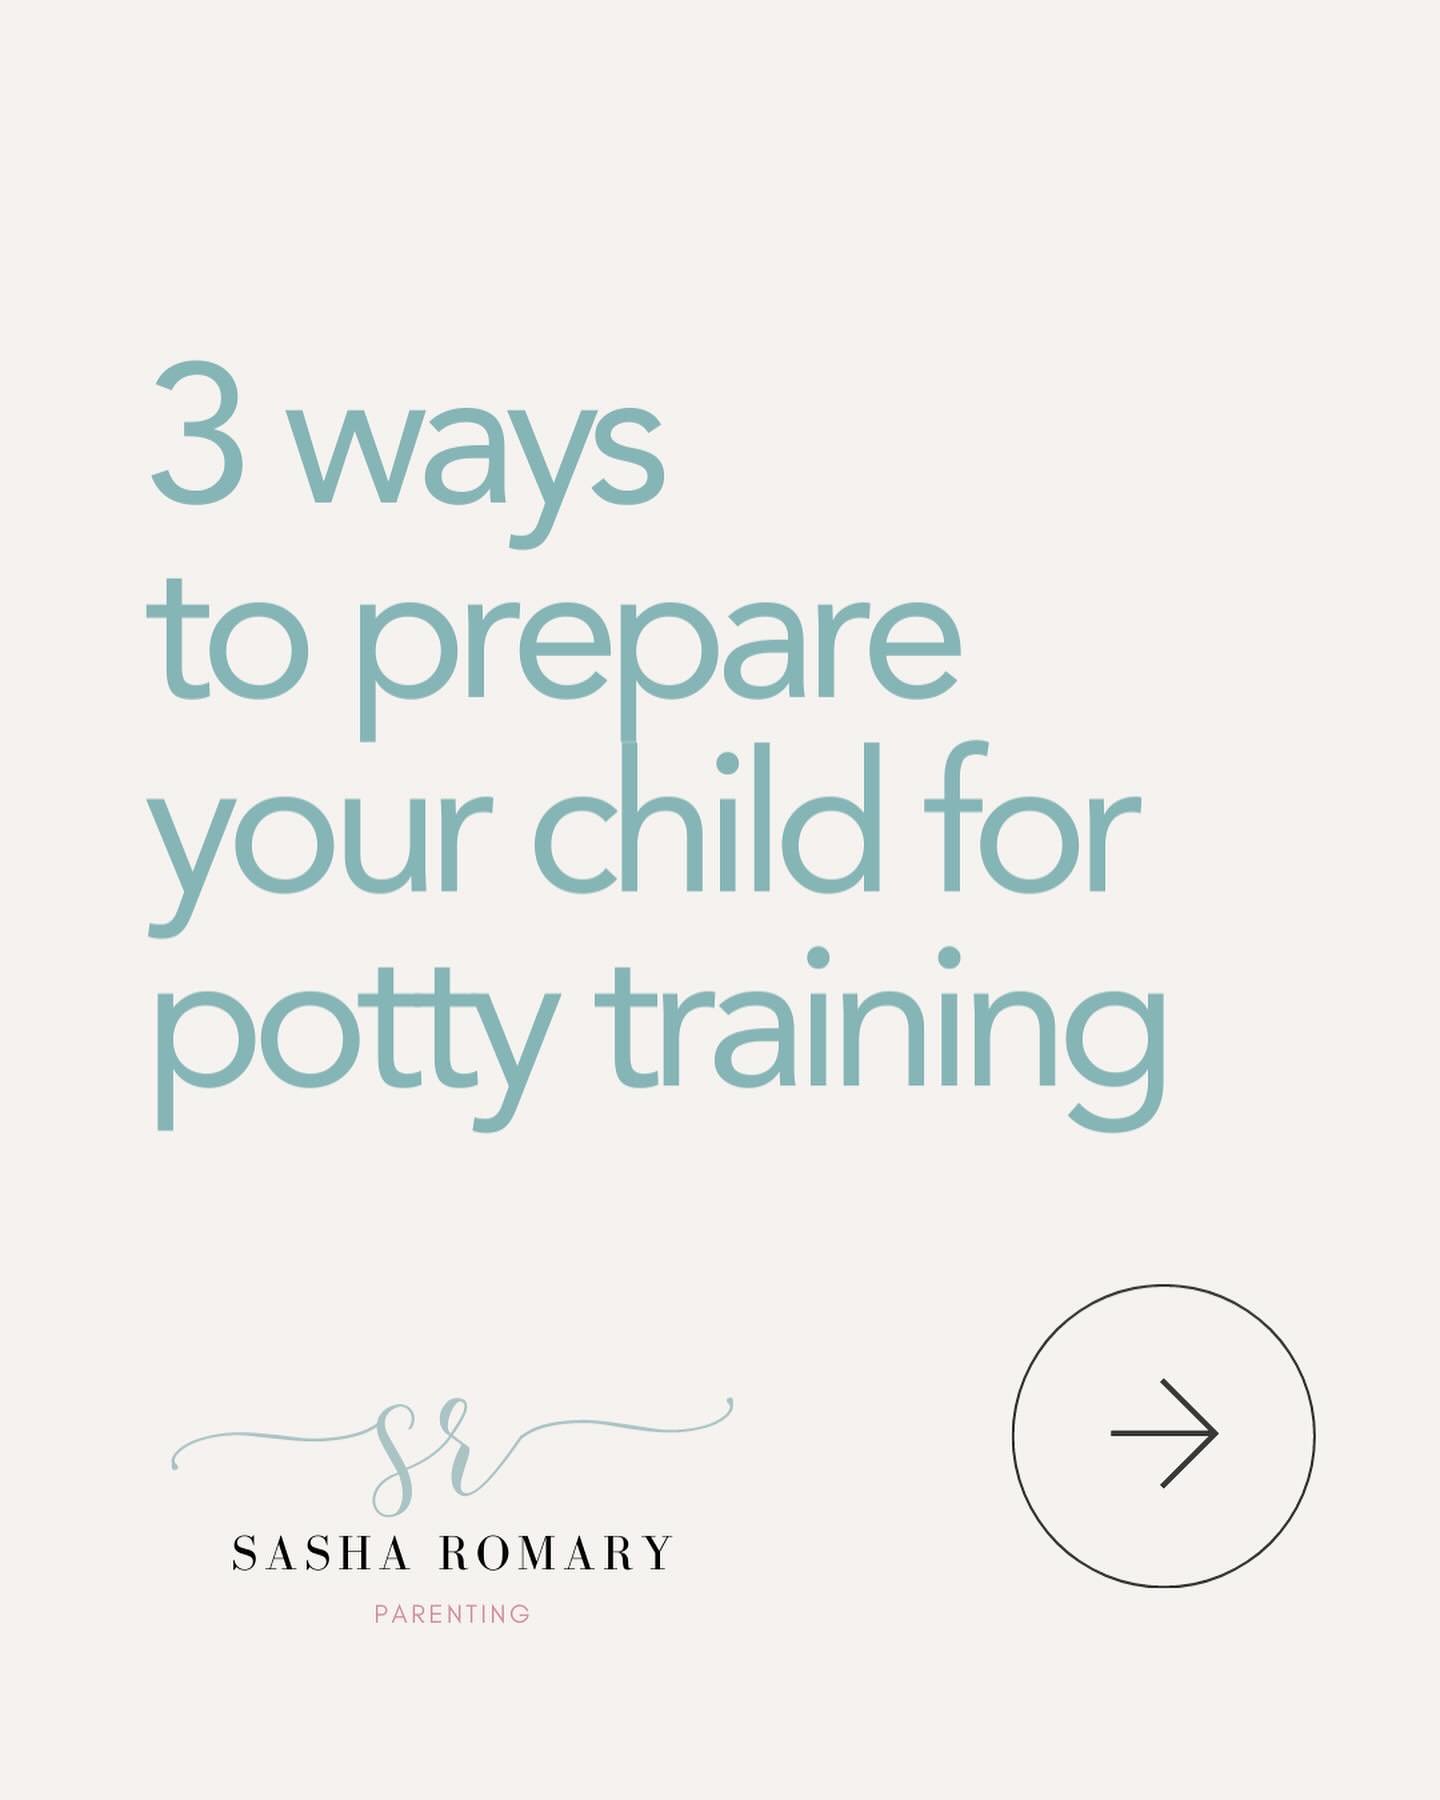 SAVE this post if you&rsquo;re thinking of potty training soon! 

I know what you might be thinking, prepare? Don&rsquo;t we just take away the diapers and put them on a potty? 

Well, let me ask you this, would you run a marathon without training? O